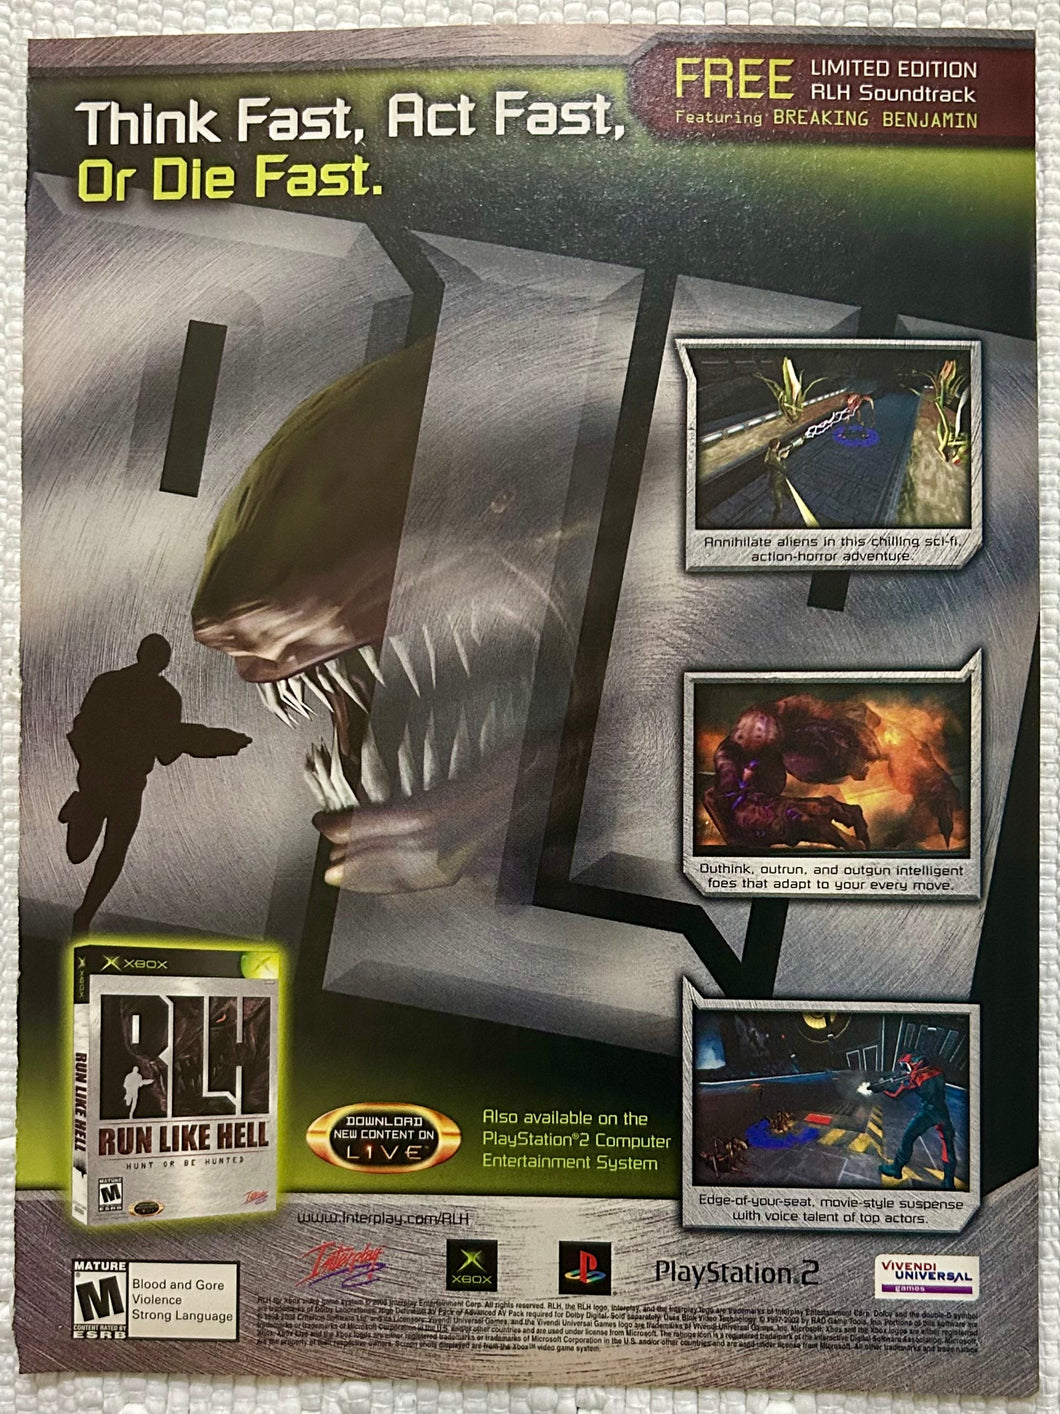 Run Like Hell - PS2 Xbox - Original Vintage Advertisement - Print Ads - Laminated A4 Poster